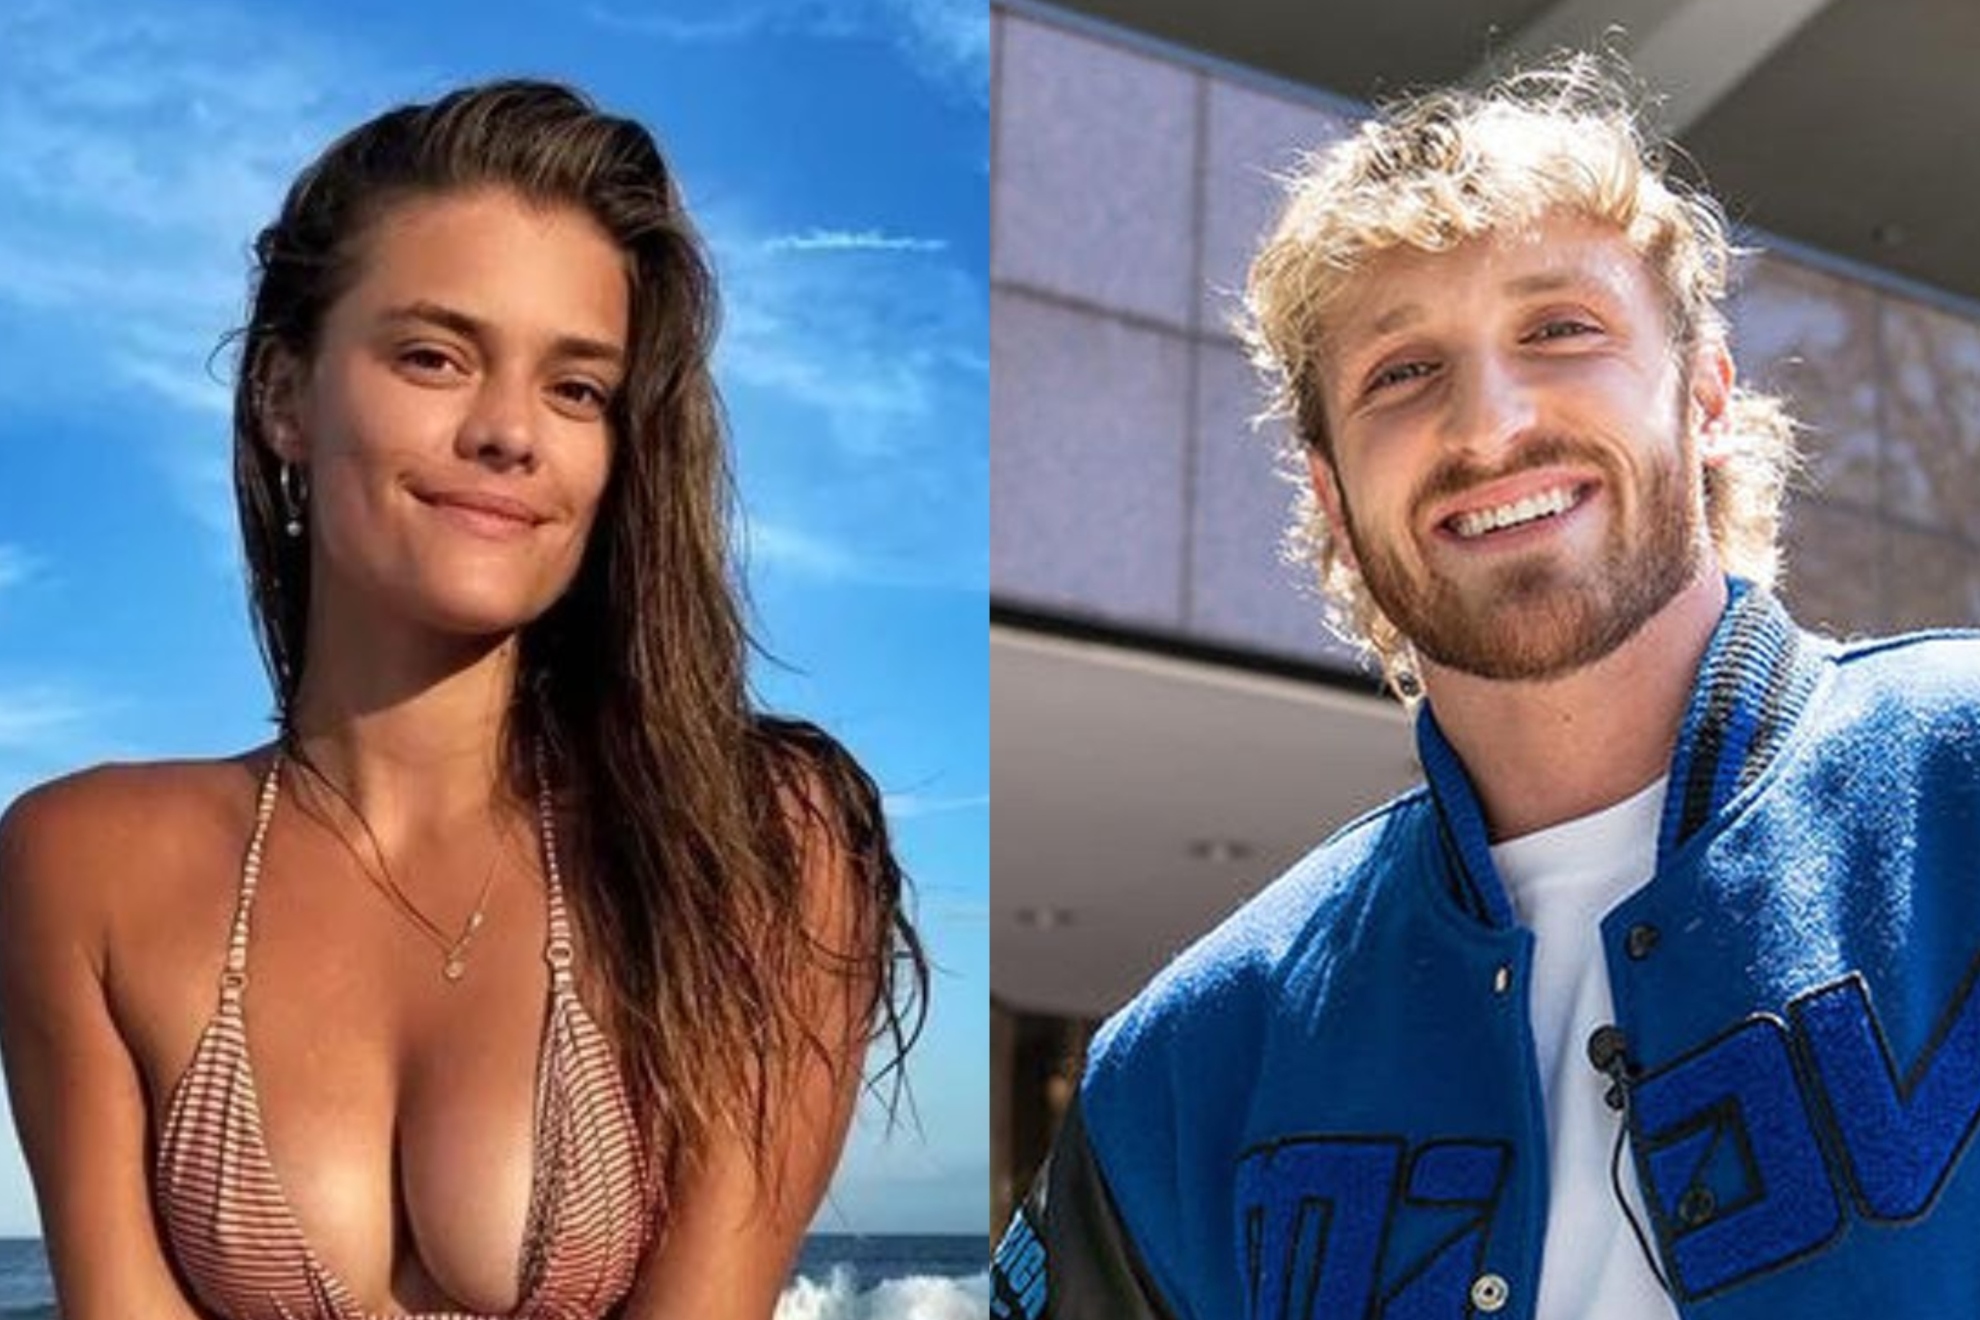 Nina Agdal and Logan Paul spotted in Greece